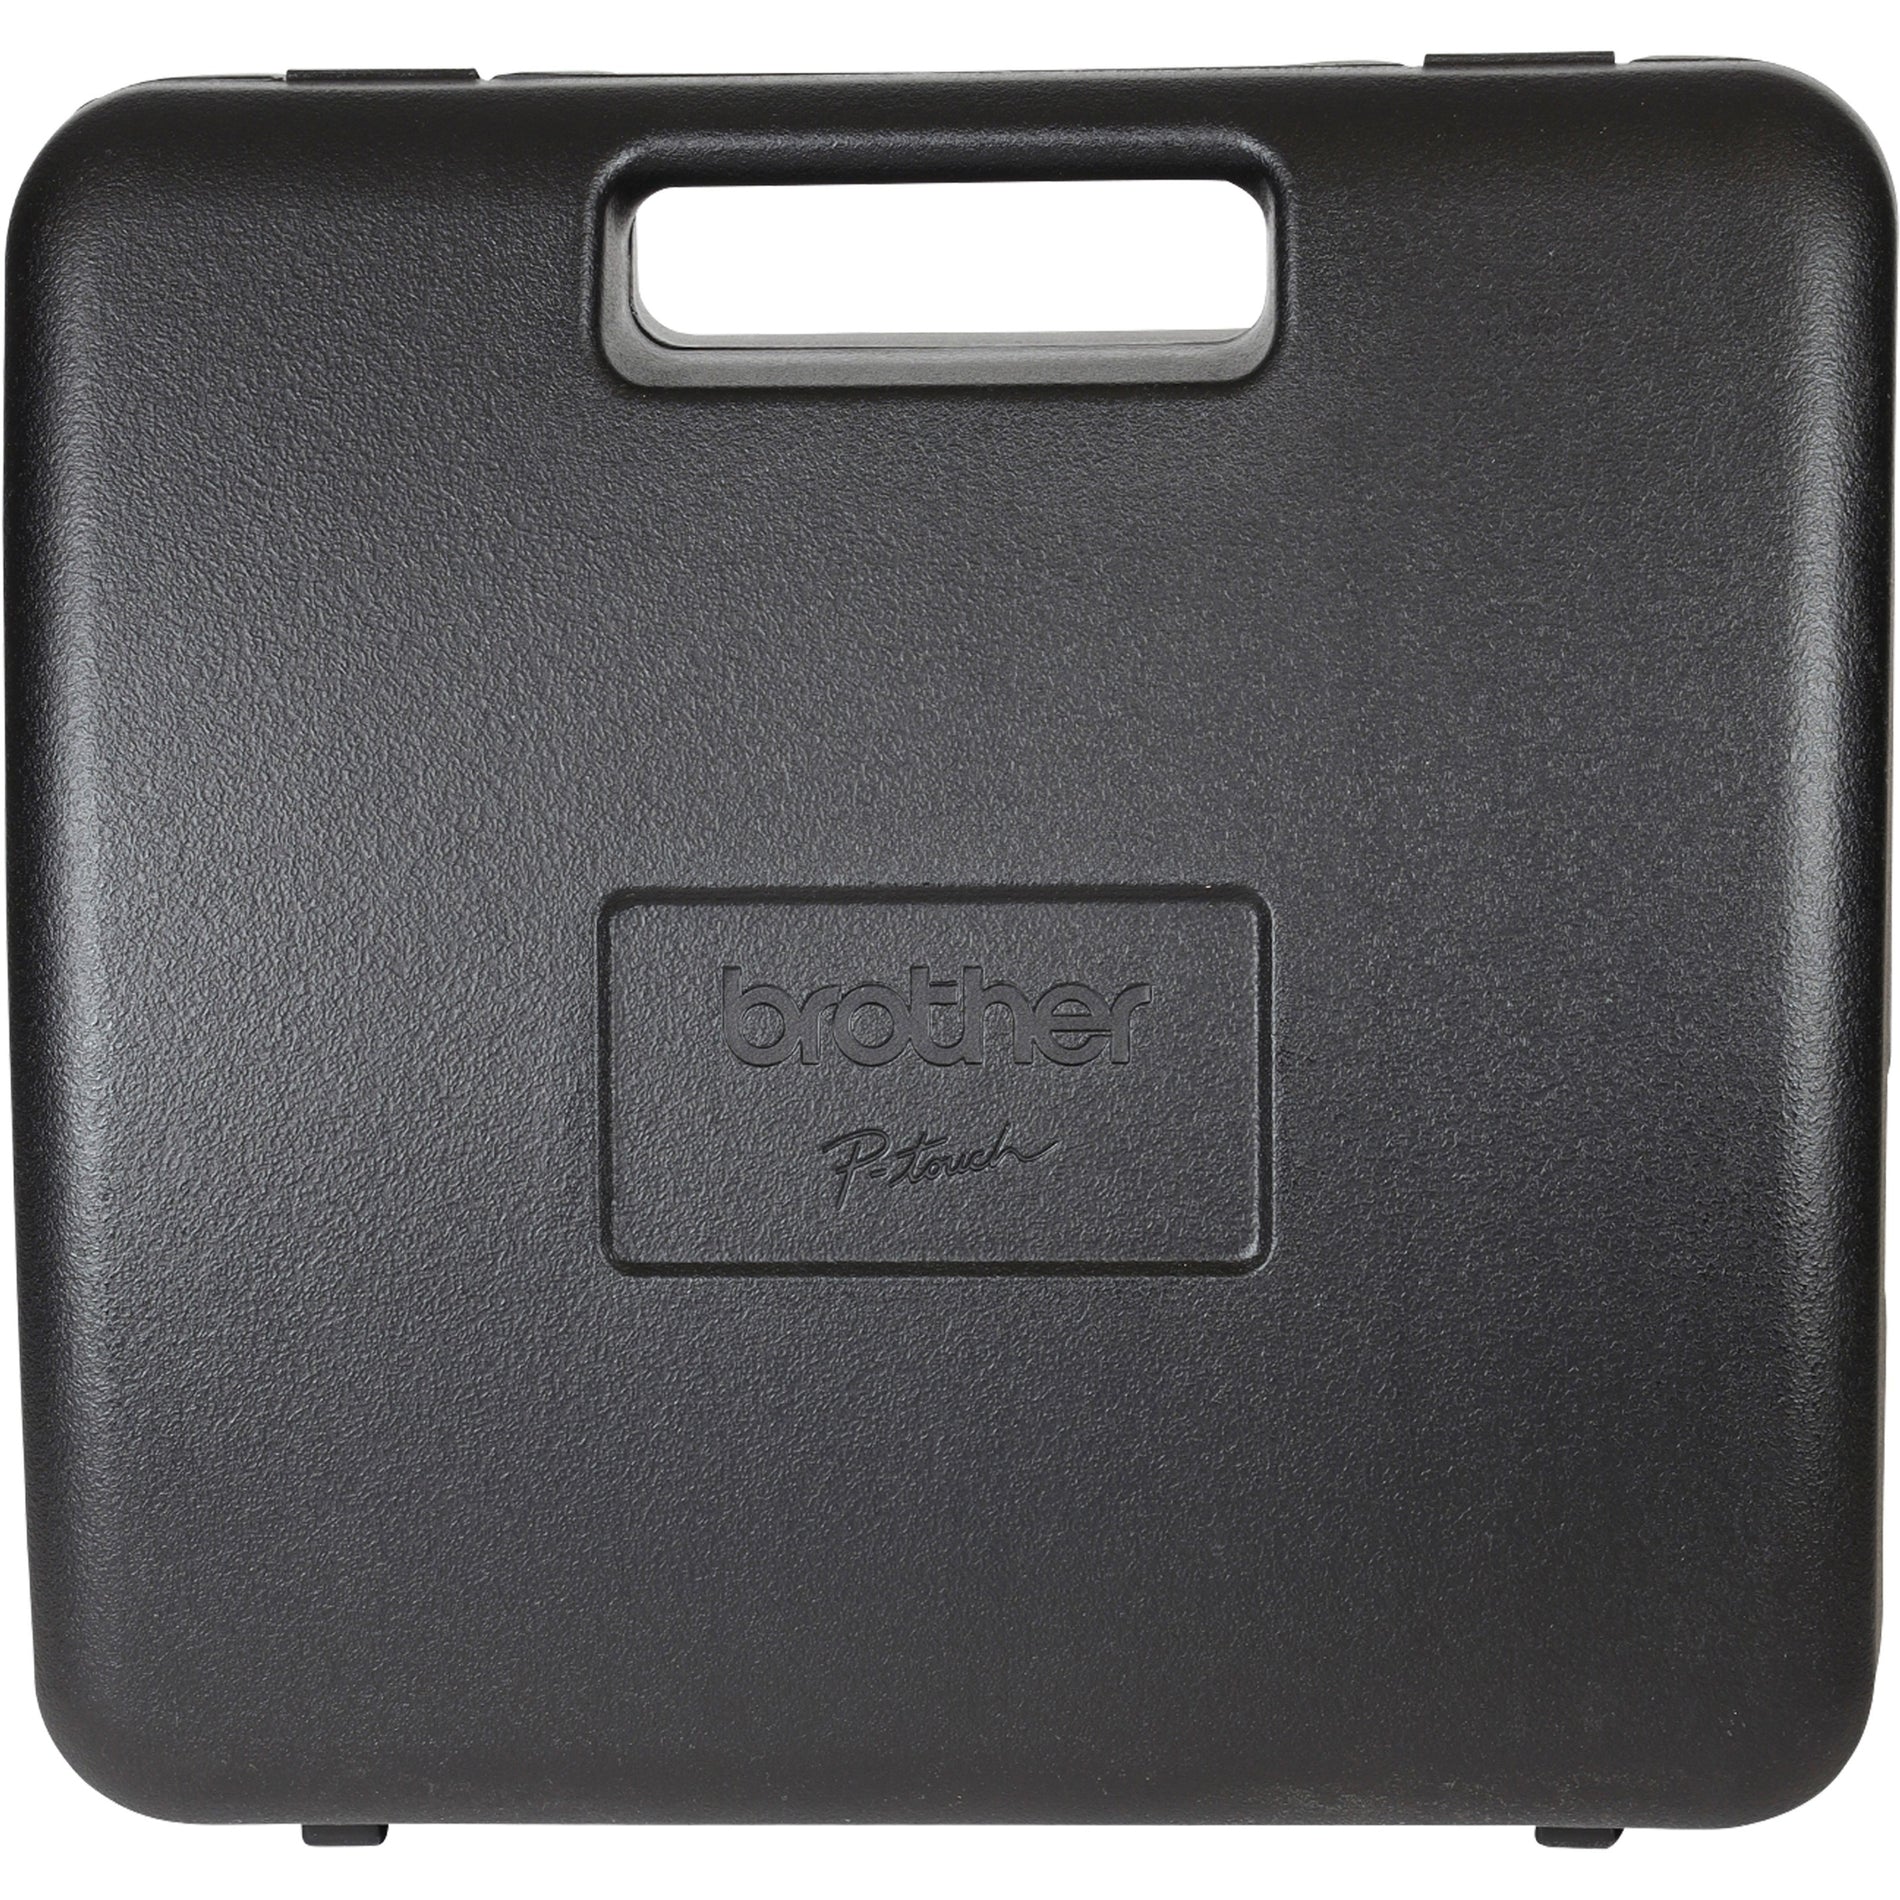 Brother CCD610 P-touch Carry/Storage Case, Moisture Resistant, Impact Resistant, 4.10 lb Weight